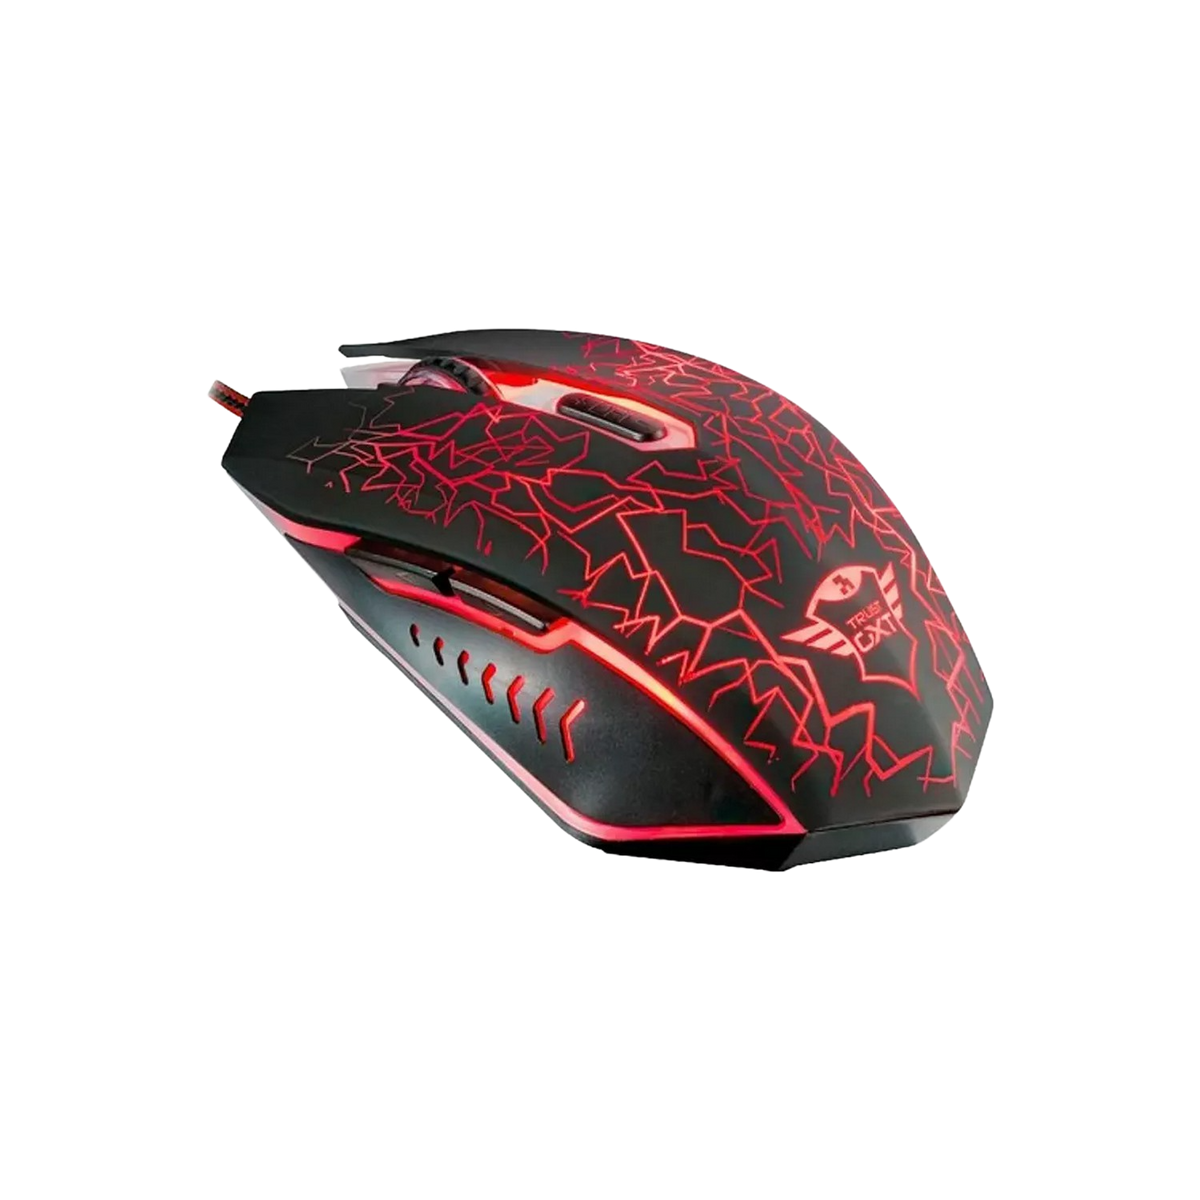 TRUST 21683 GXT GAMING Rot Gaming Schwarz/Leuchtfarbe MOUSE 105 Maus